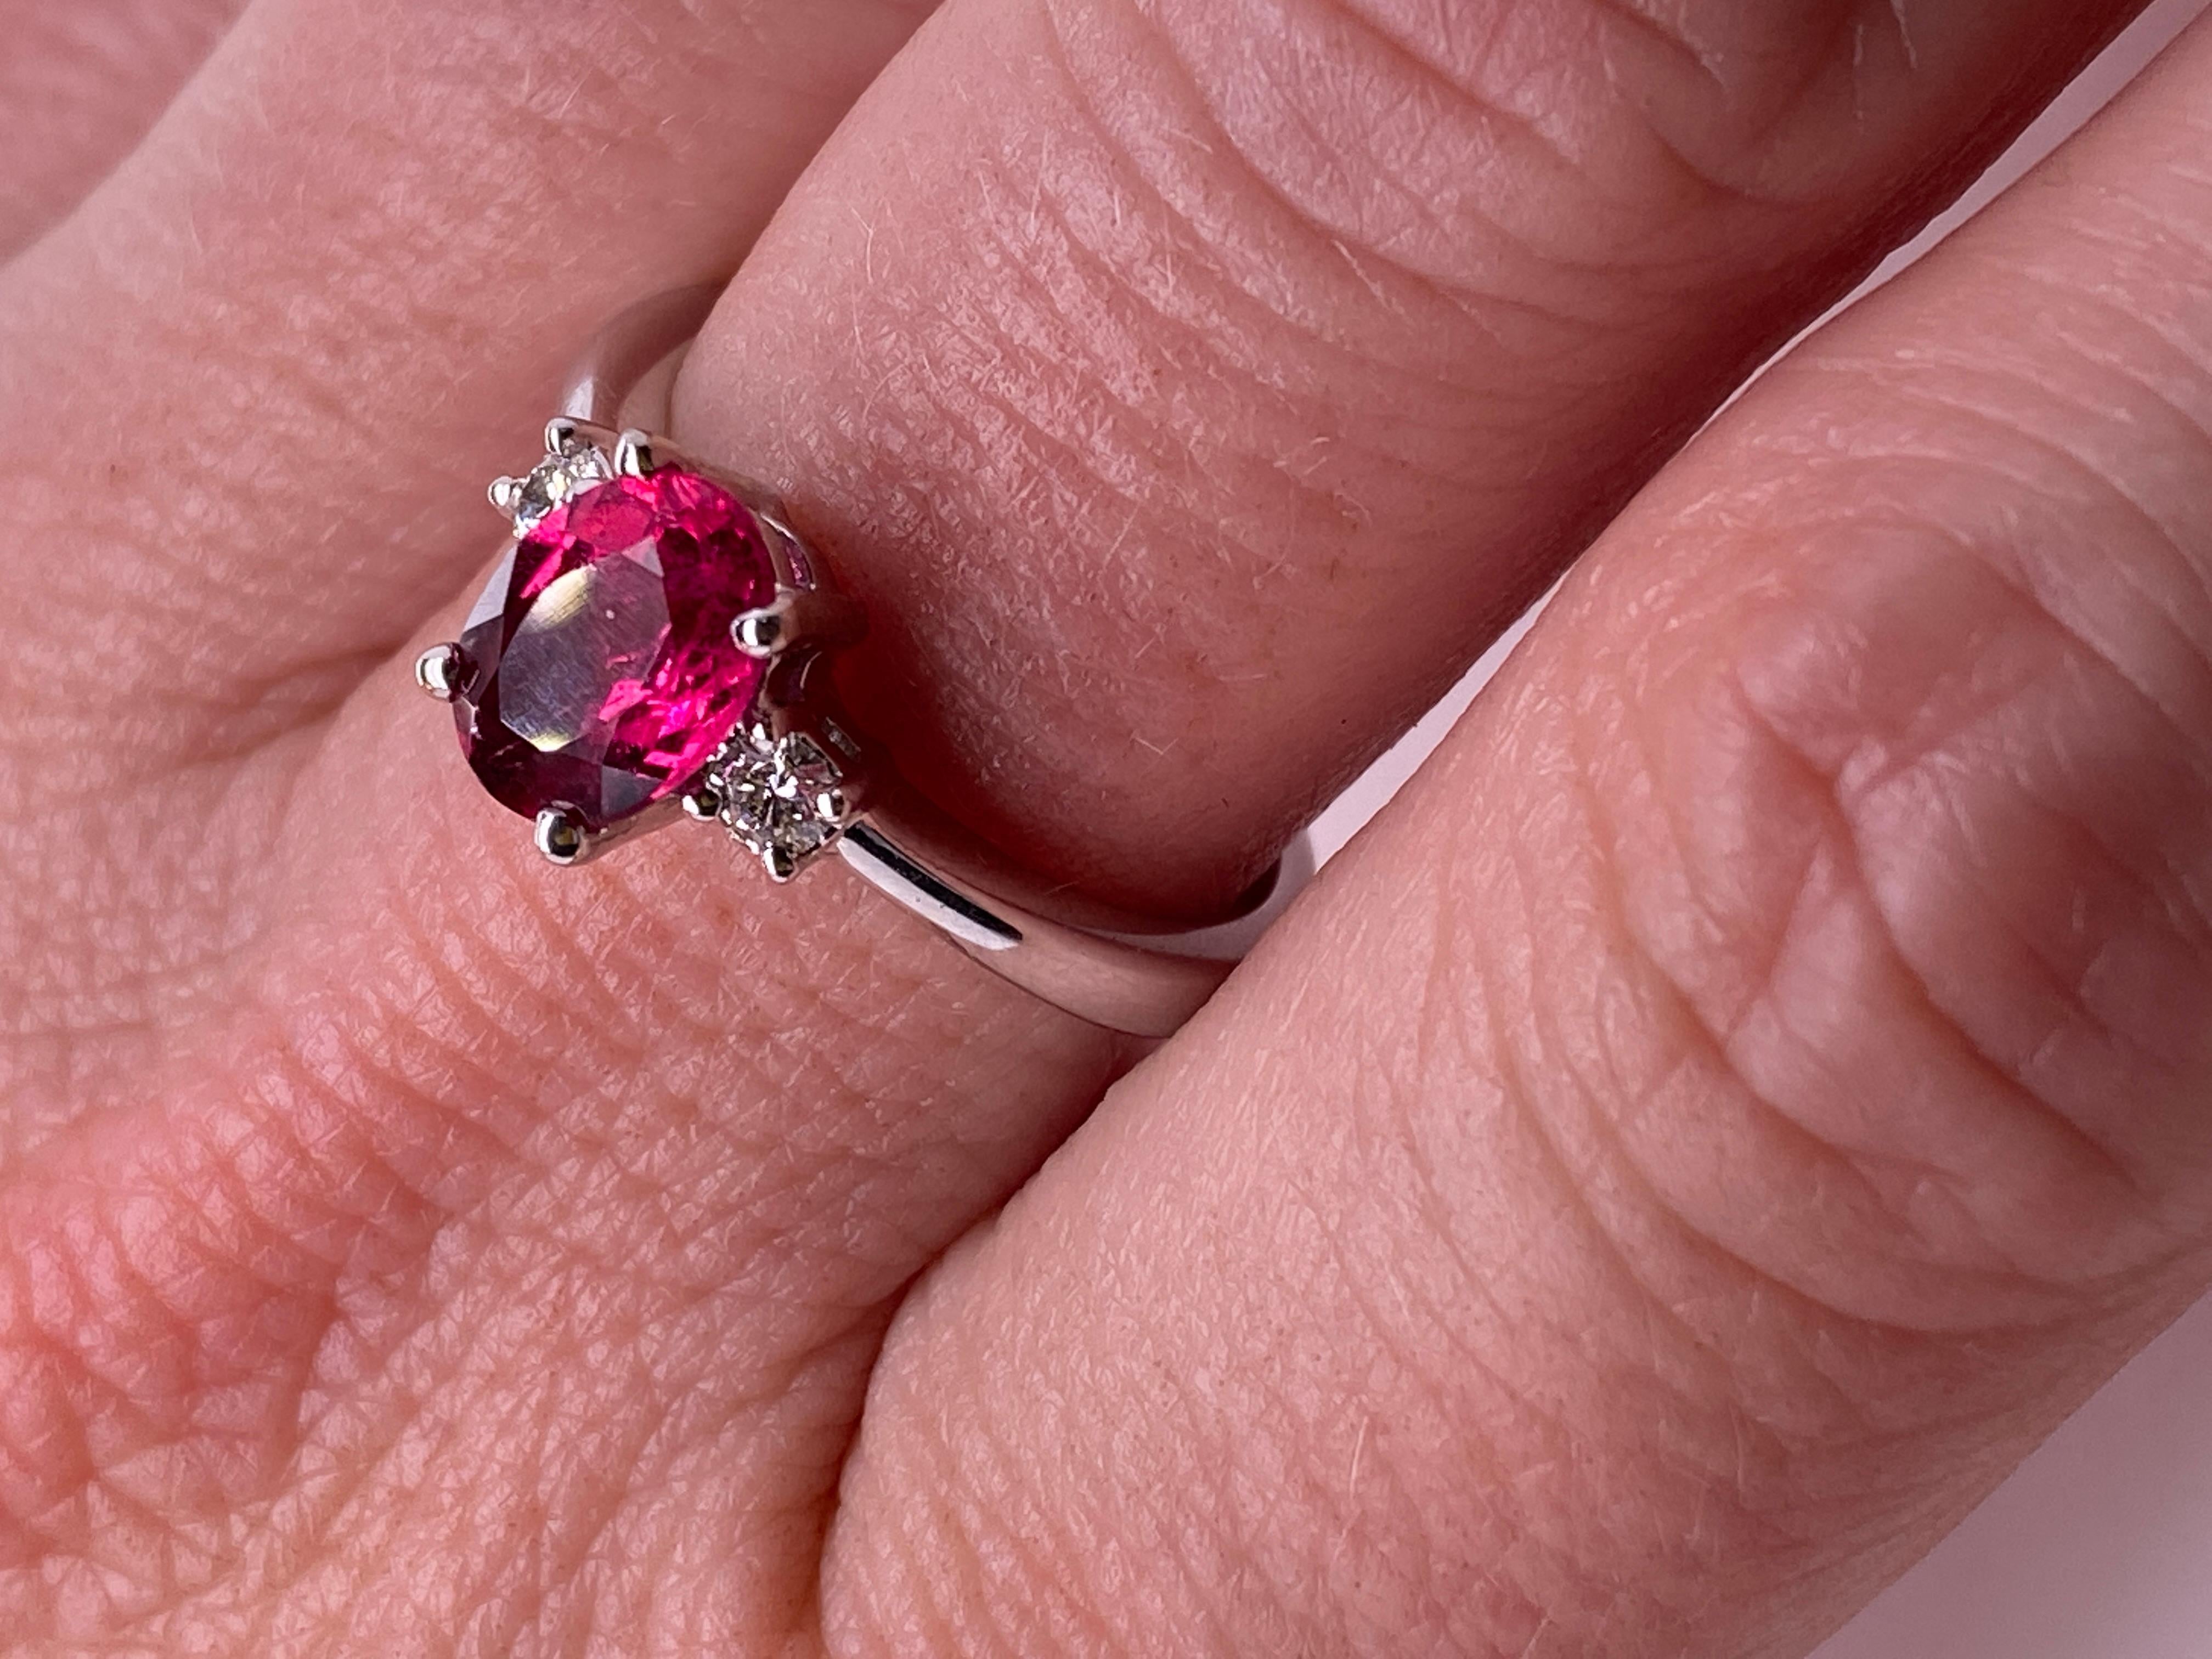 Women's Bright, Pink, Oval Tourmaline Engagement Ring with Diamonds, 14K White Gold